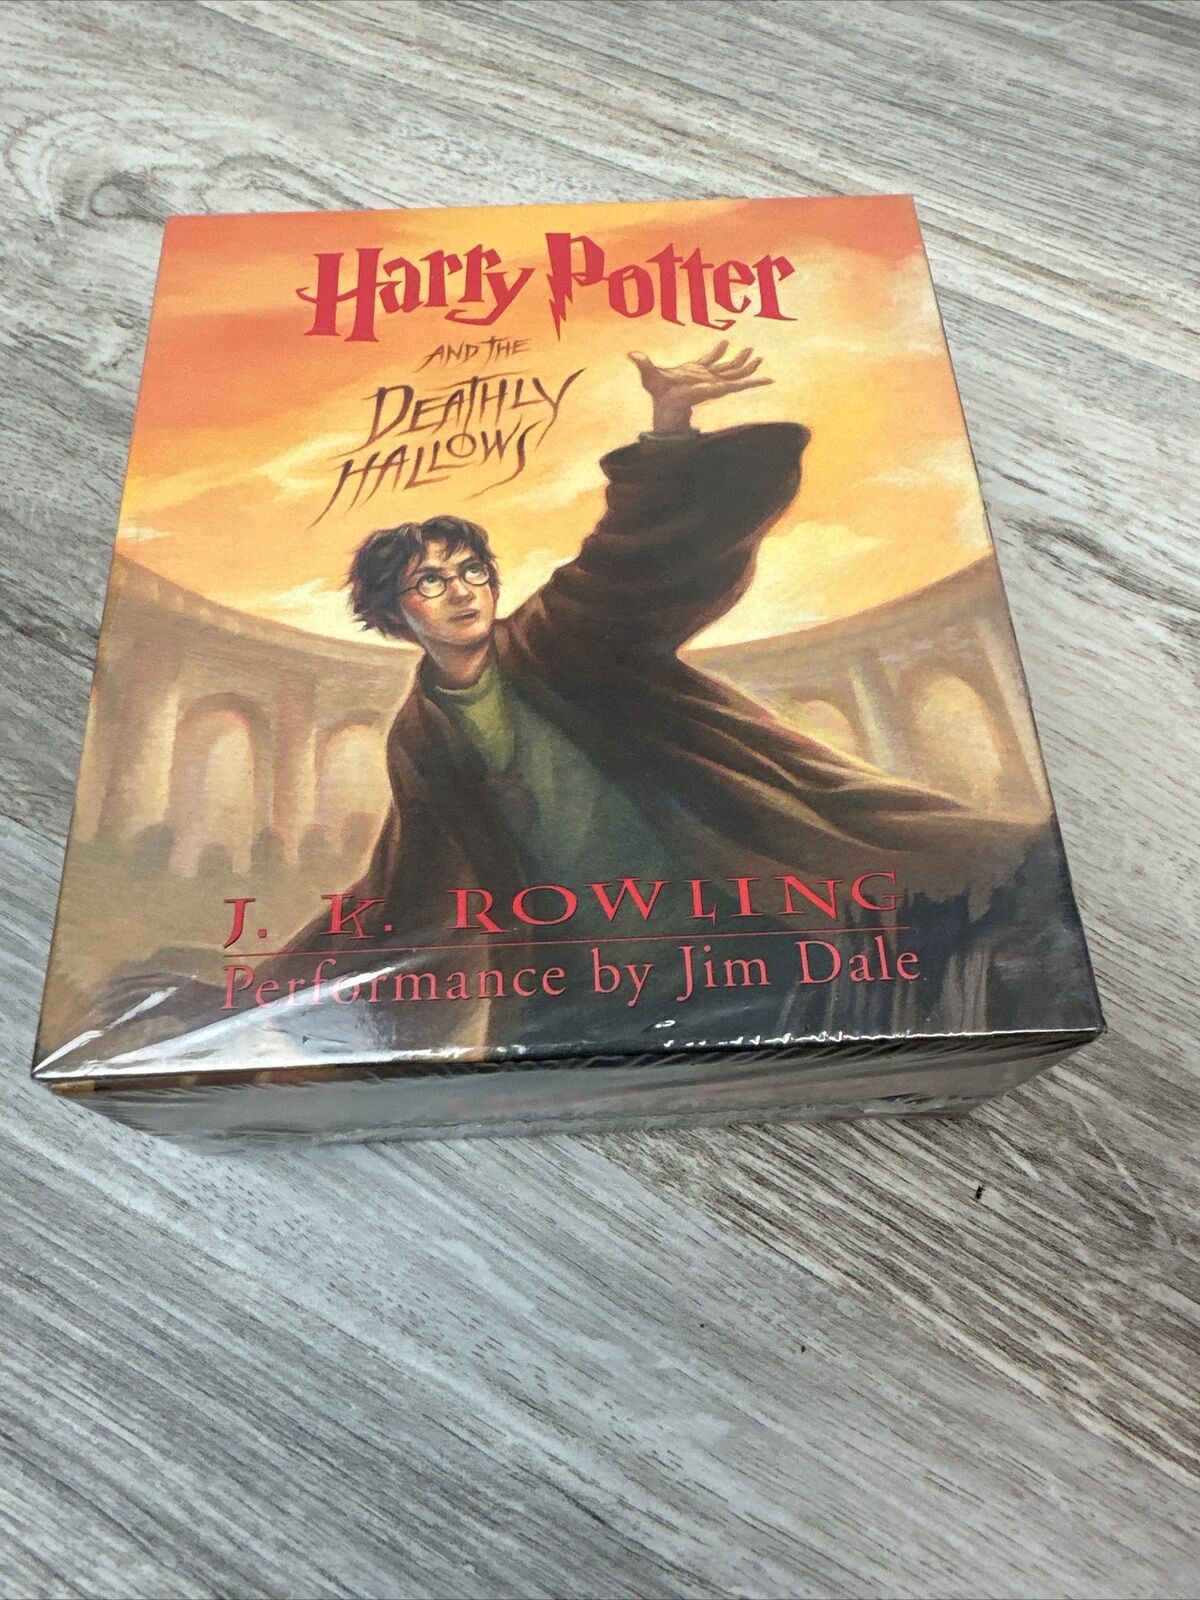 Are Harry Potter audiobooks available in virtual reality? 2